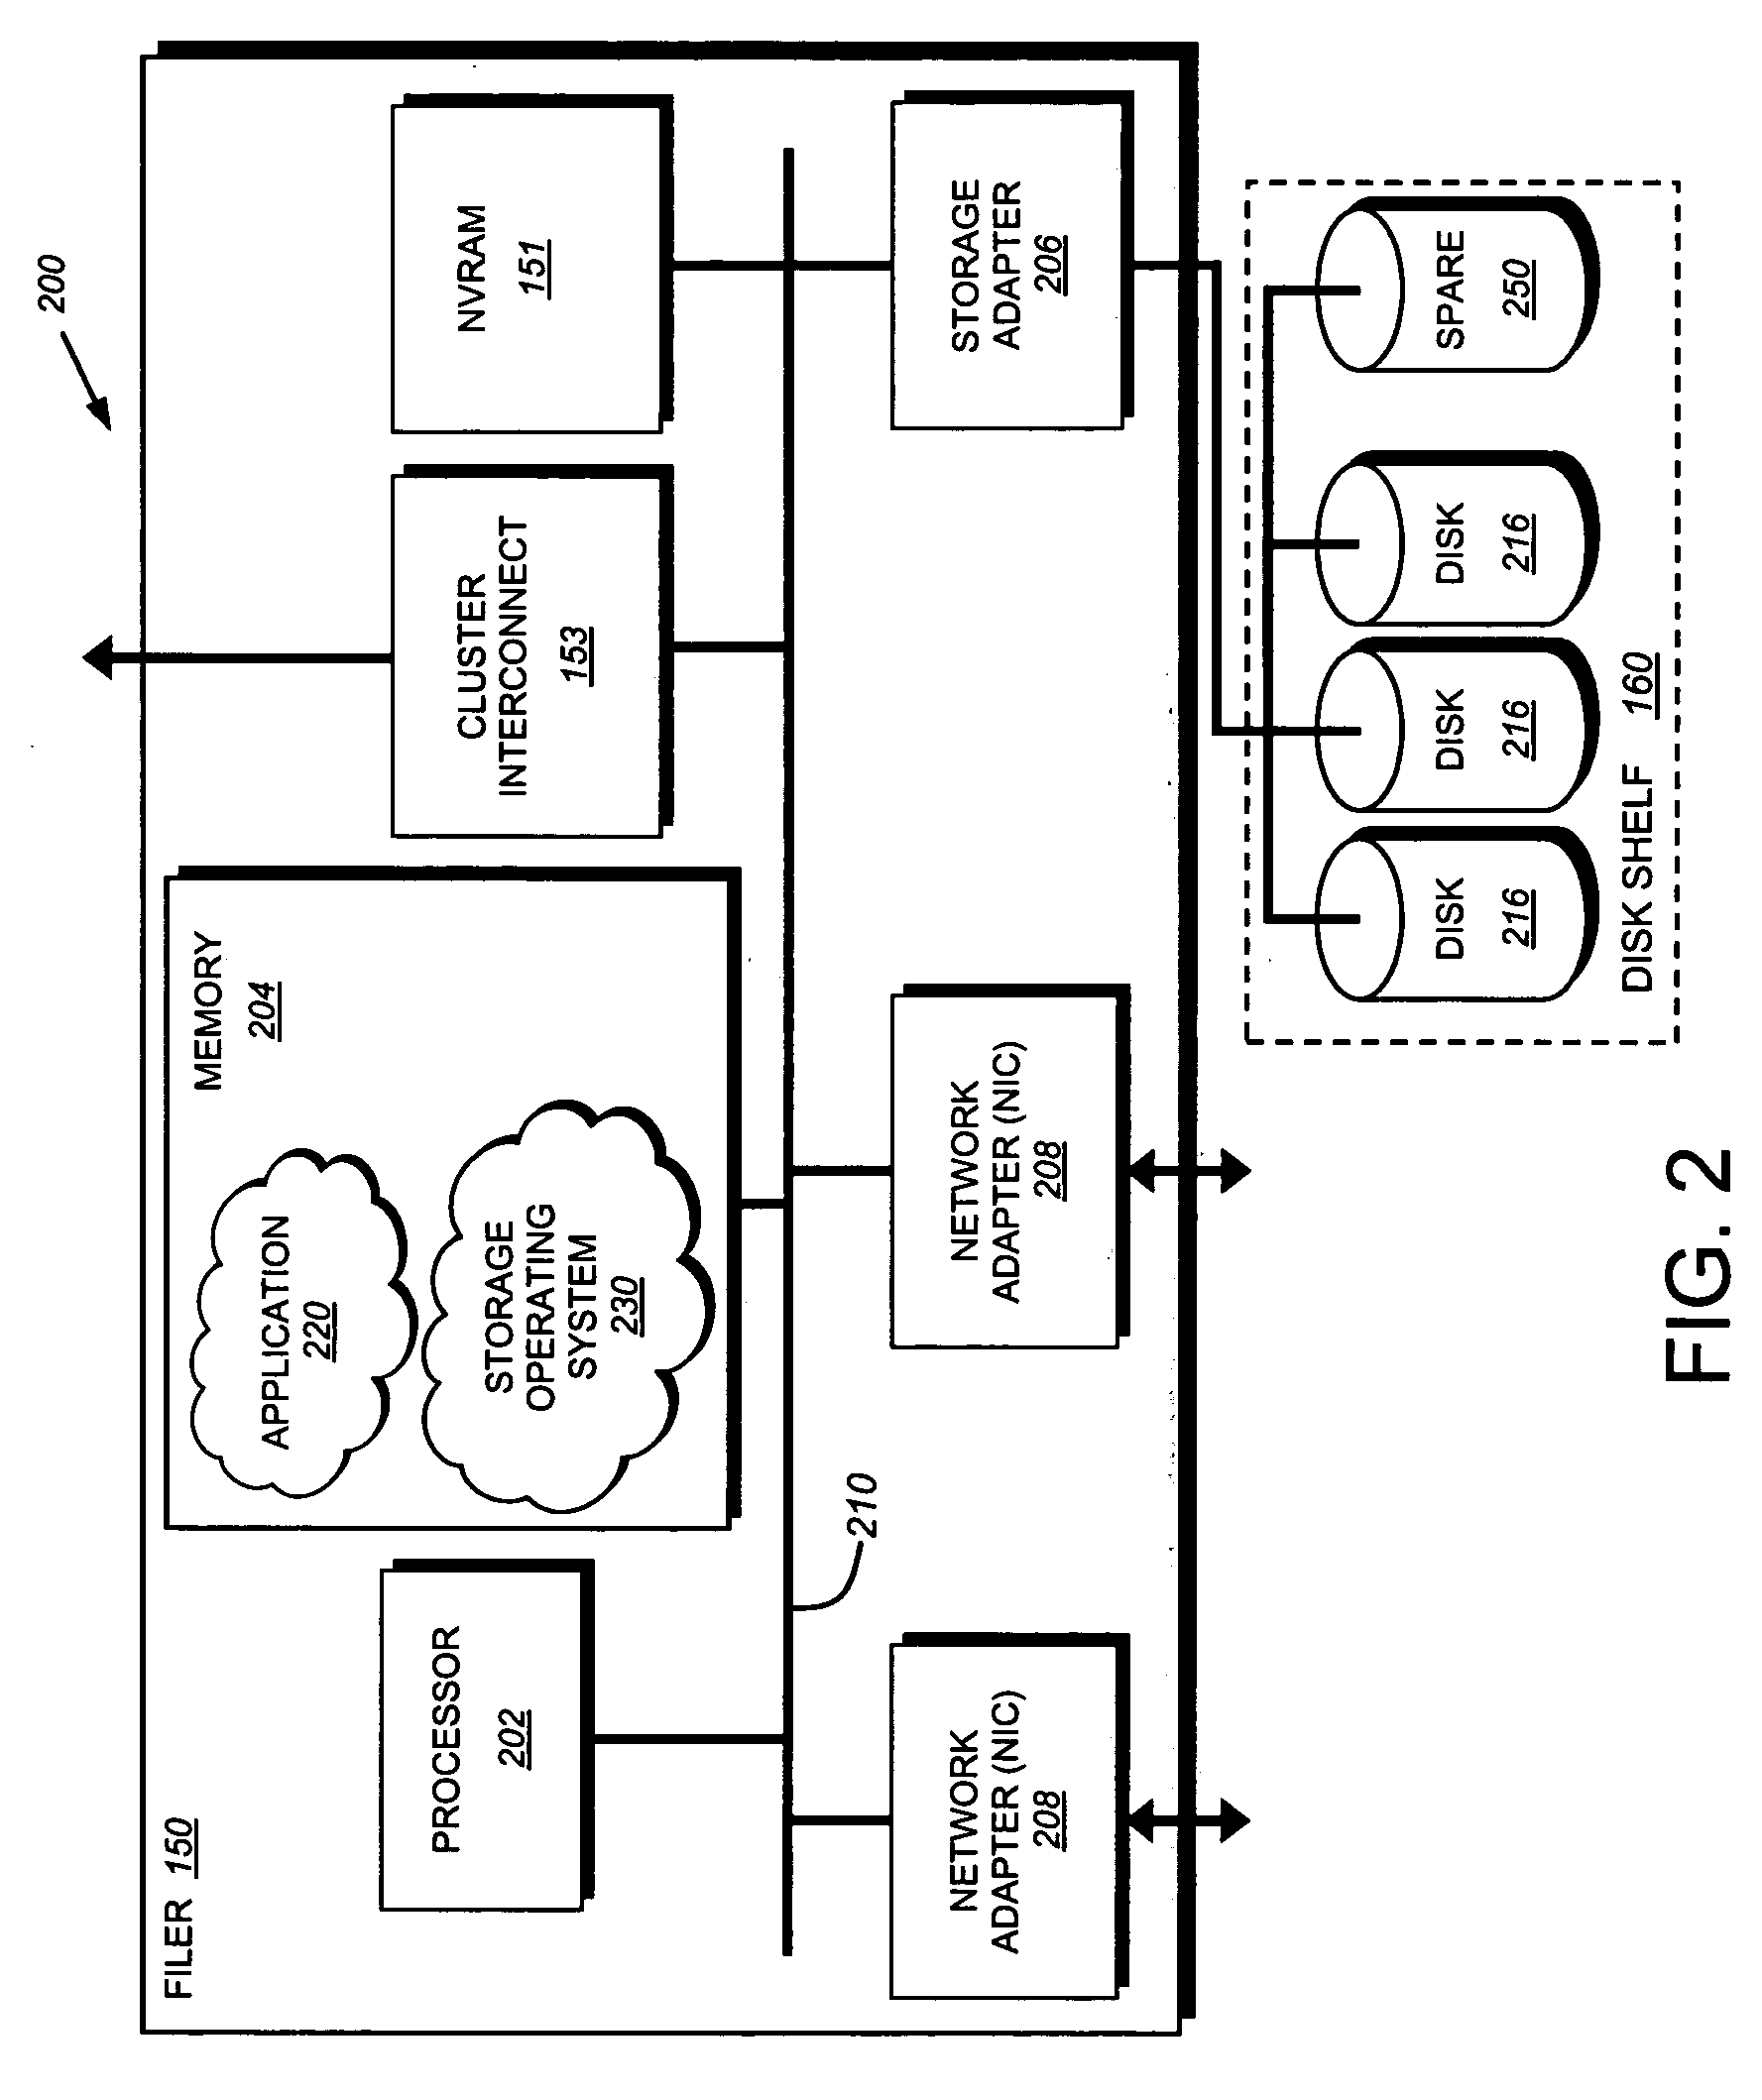 System and method of selection and communication of a disk for storage of a coredump